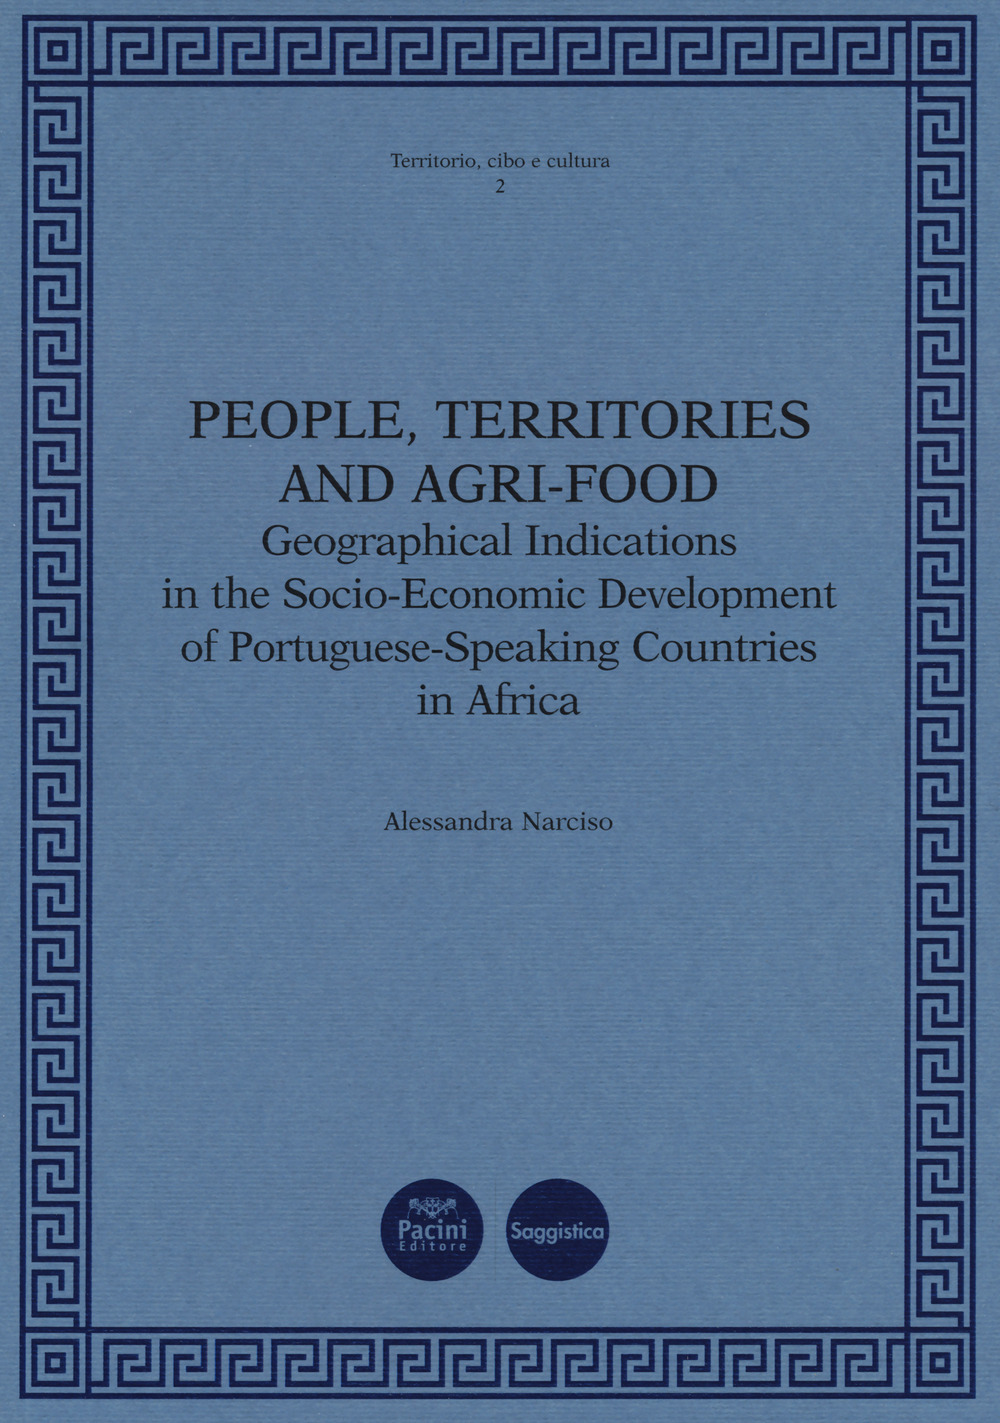 People, territories and agri-food. Geographical Indications in the Socio-Economic Development of Portuguese-Speaking Countries in Africa